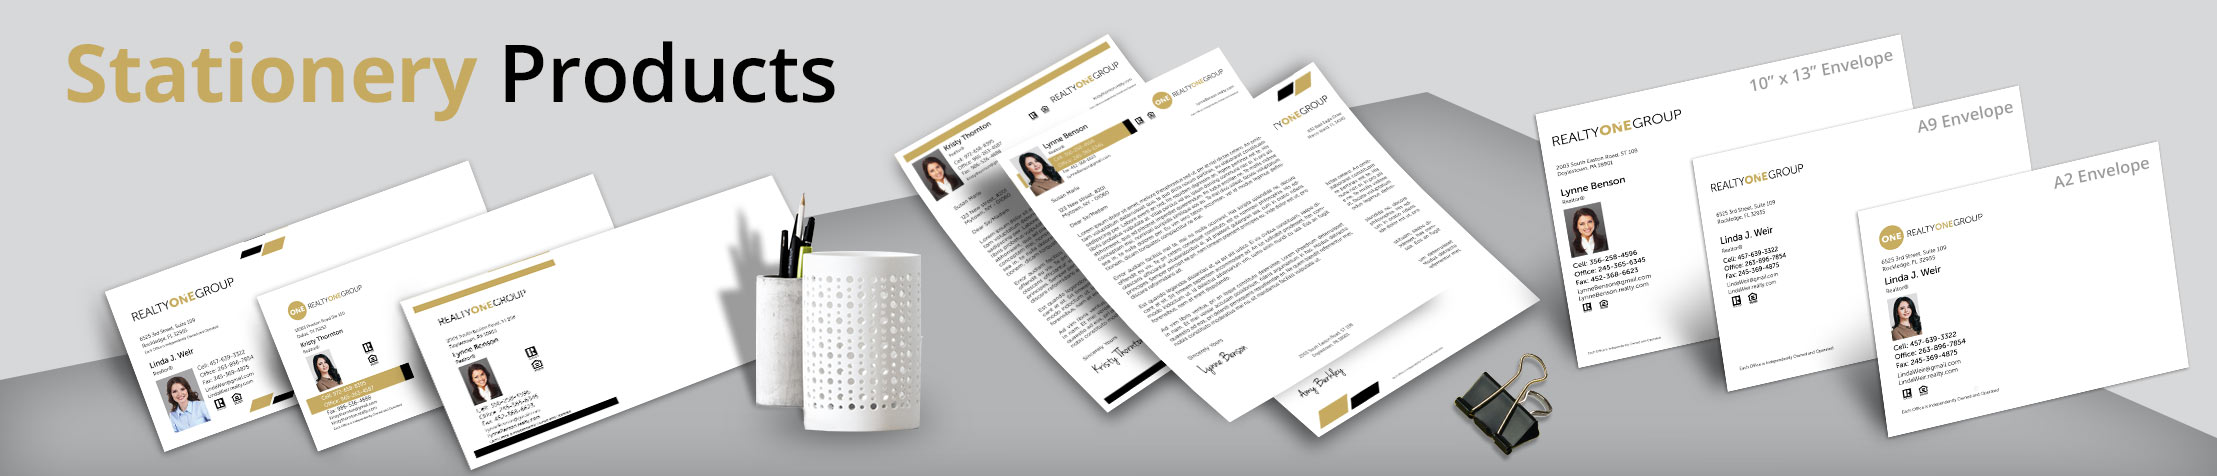 Realty One Group Real Estate Stationery Products - Custom Letterhead & Envelopes Stationery Products for Realtors | BestPrintBuy.com